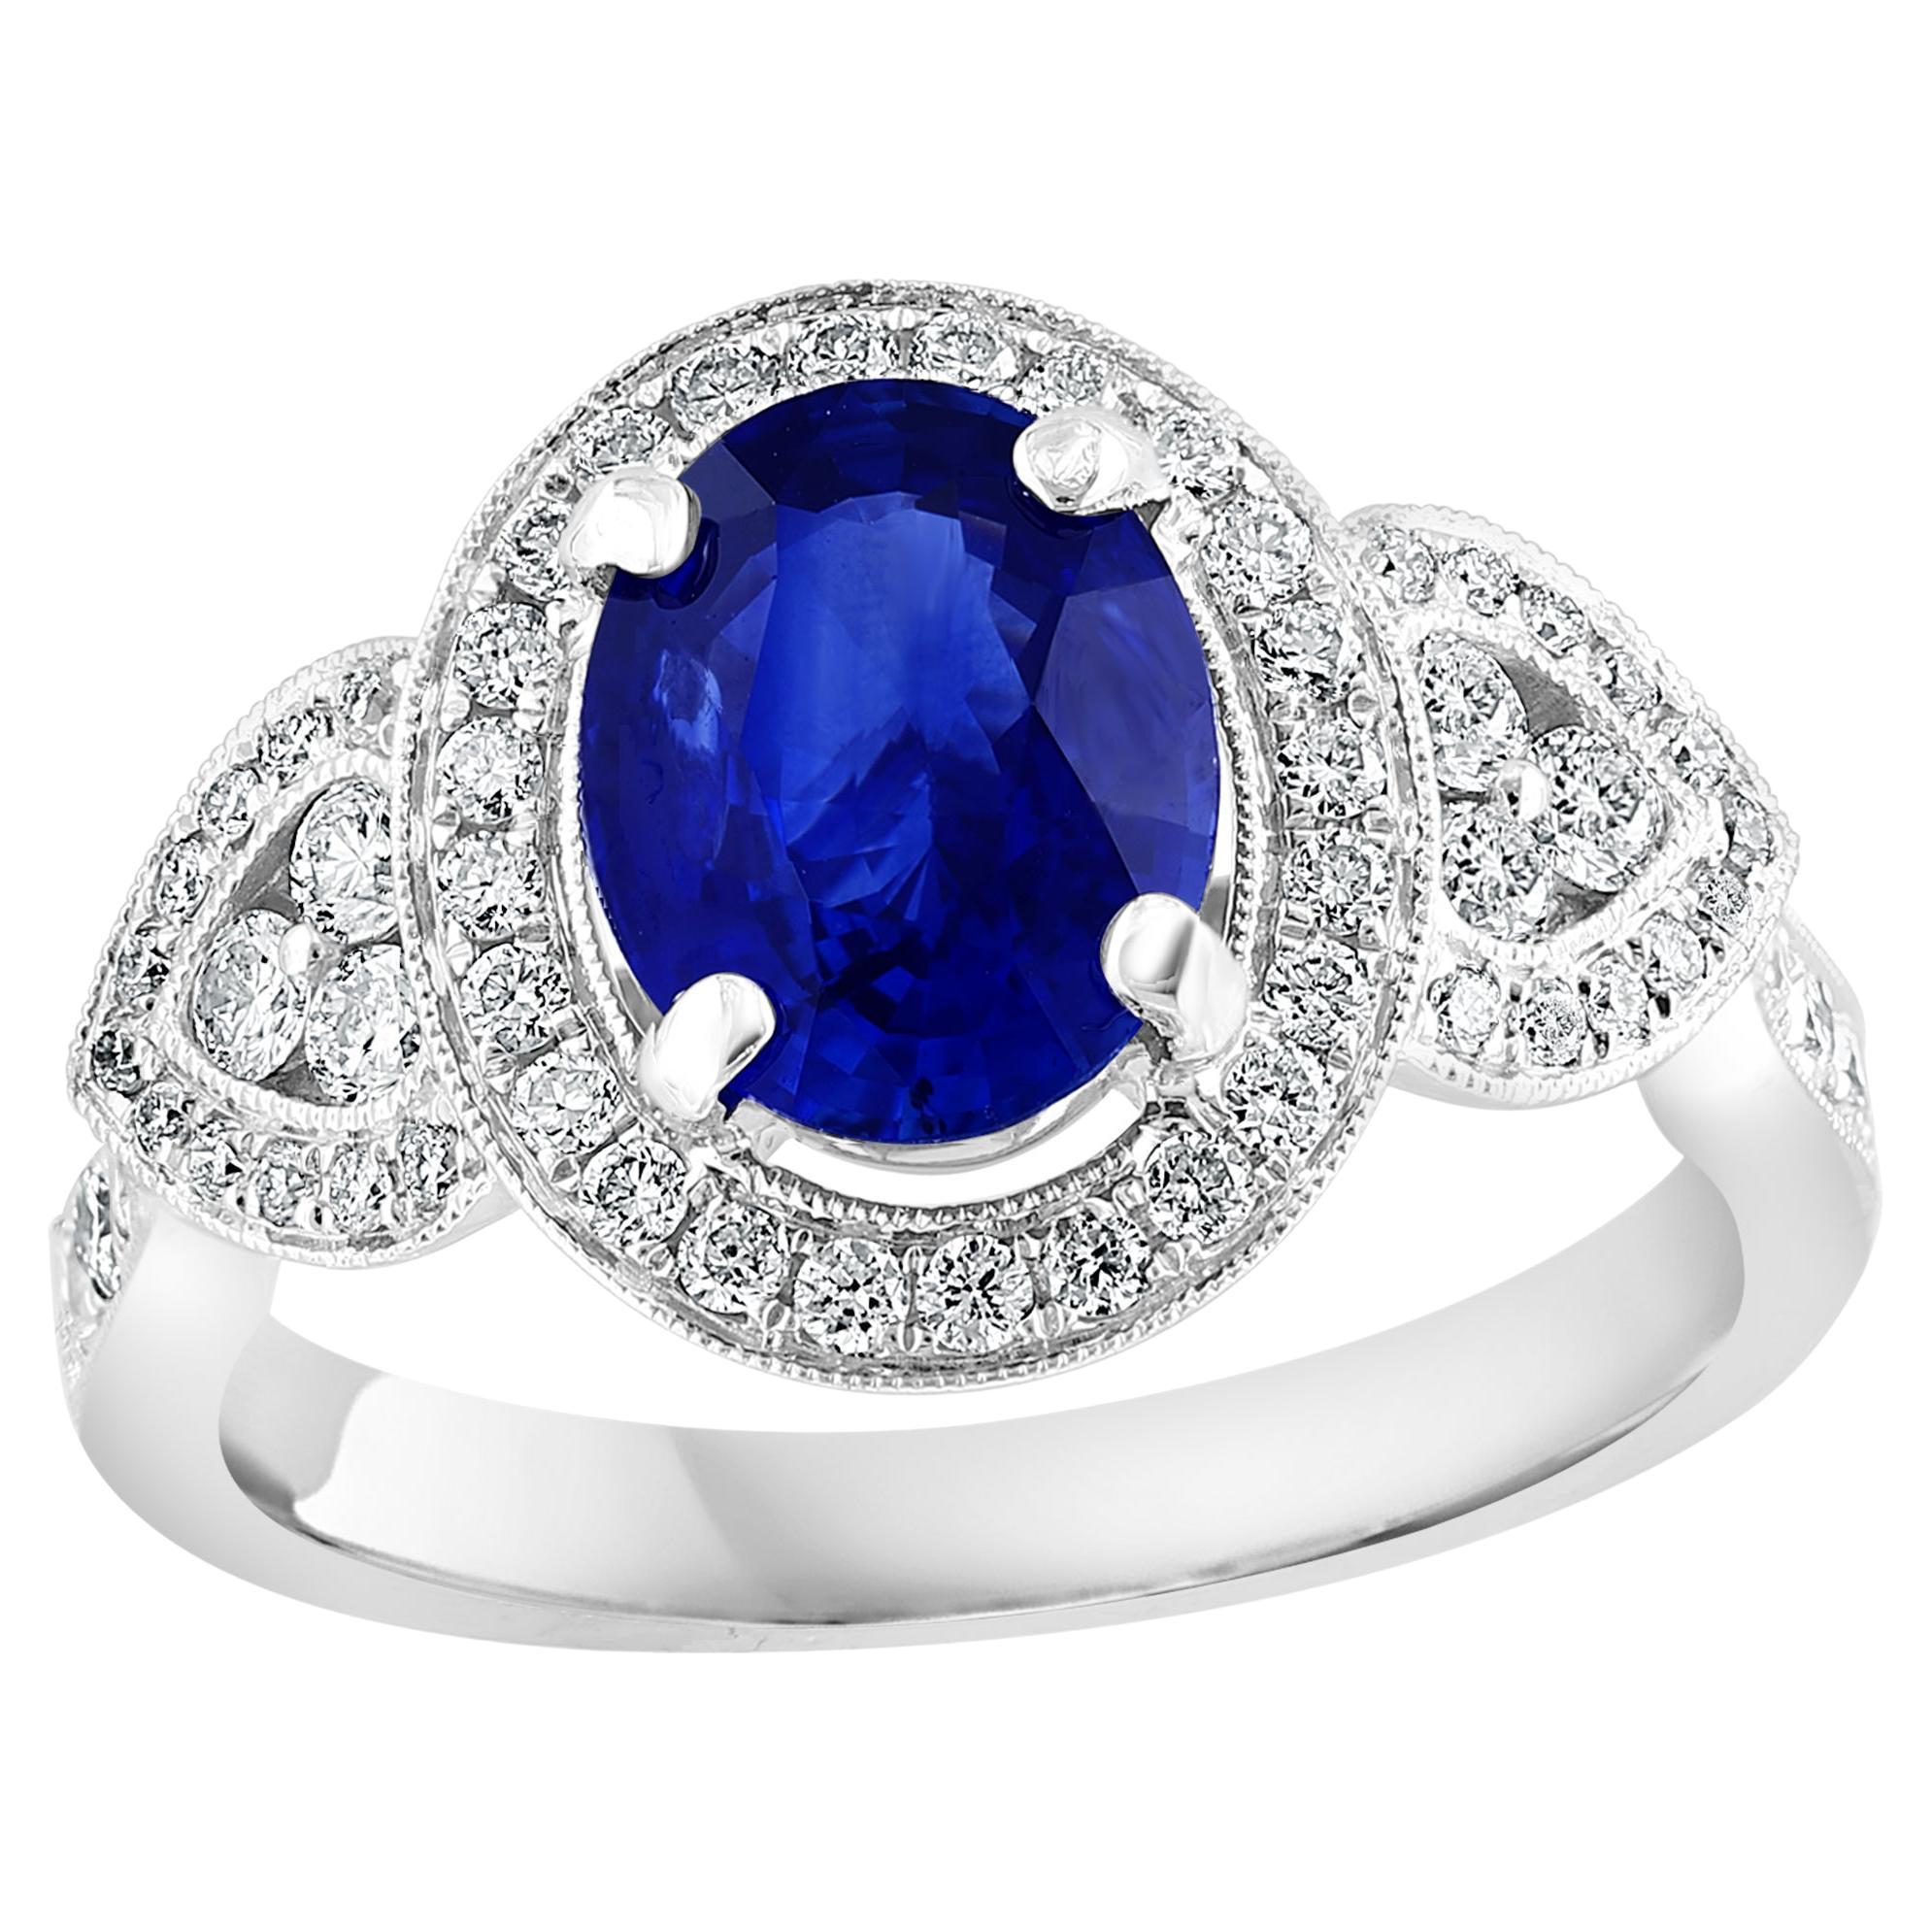 2.08 Carat Oval Cut Sapphire and Diamond Engagement Ring in 18K White Gold For Sale